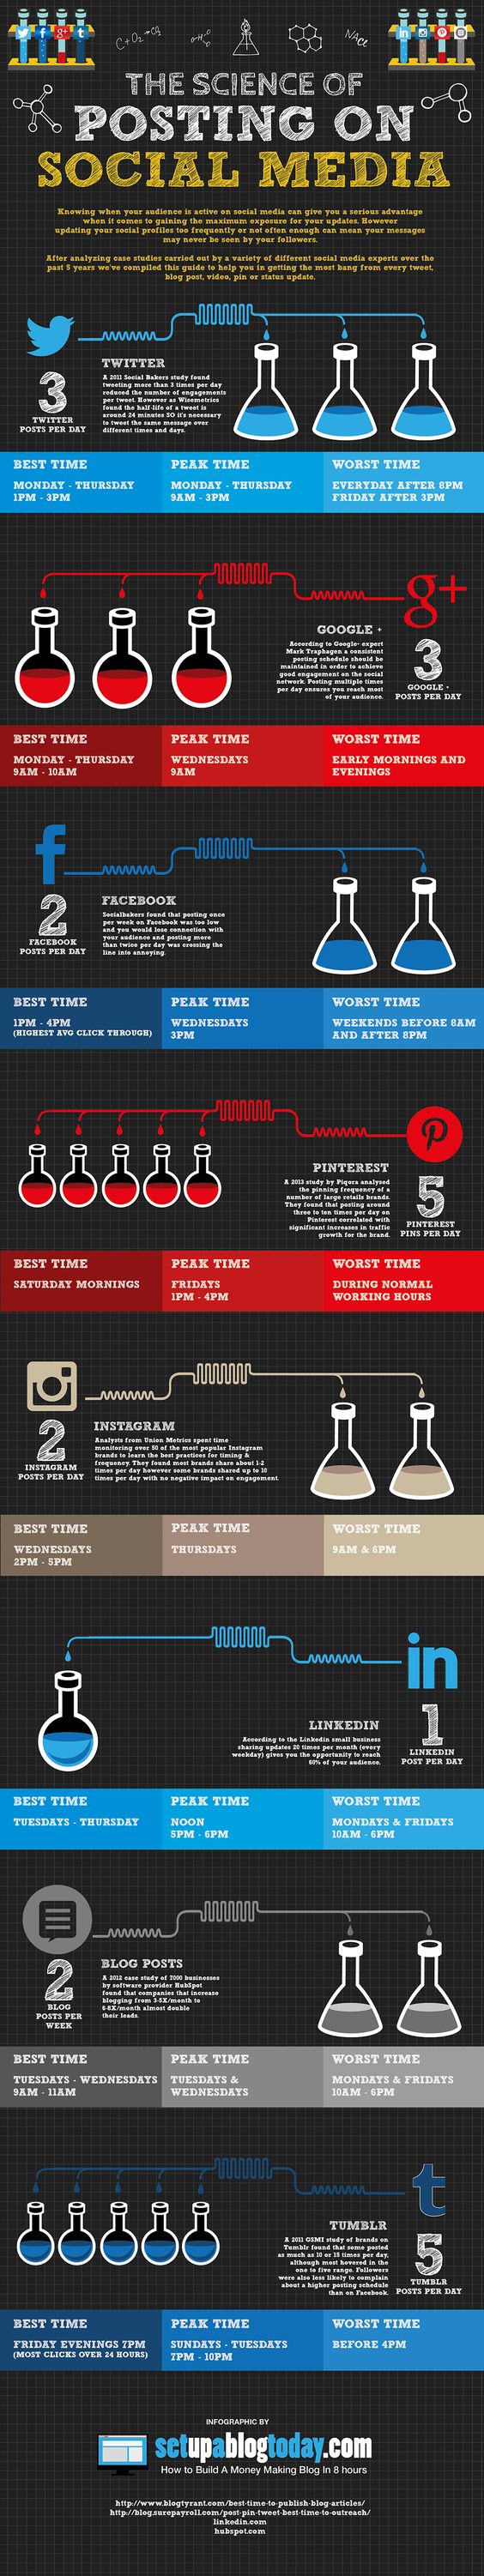 THE SCIENCE OF POSTING ON SOCIAL MEDIA #INFOGRAPHIC